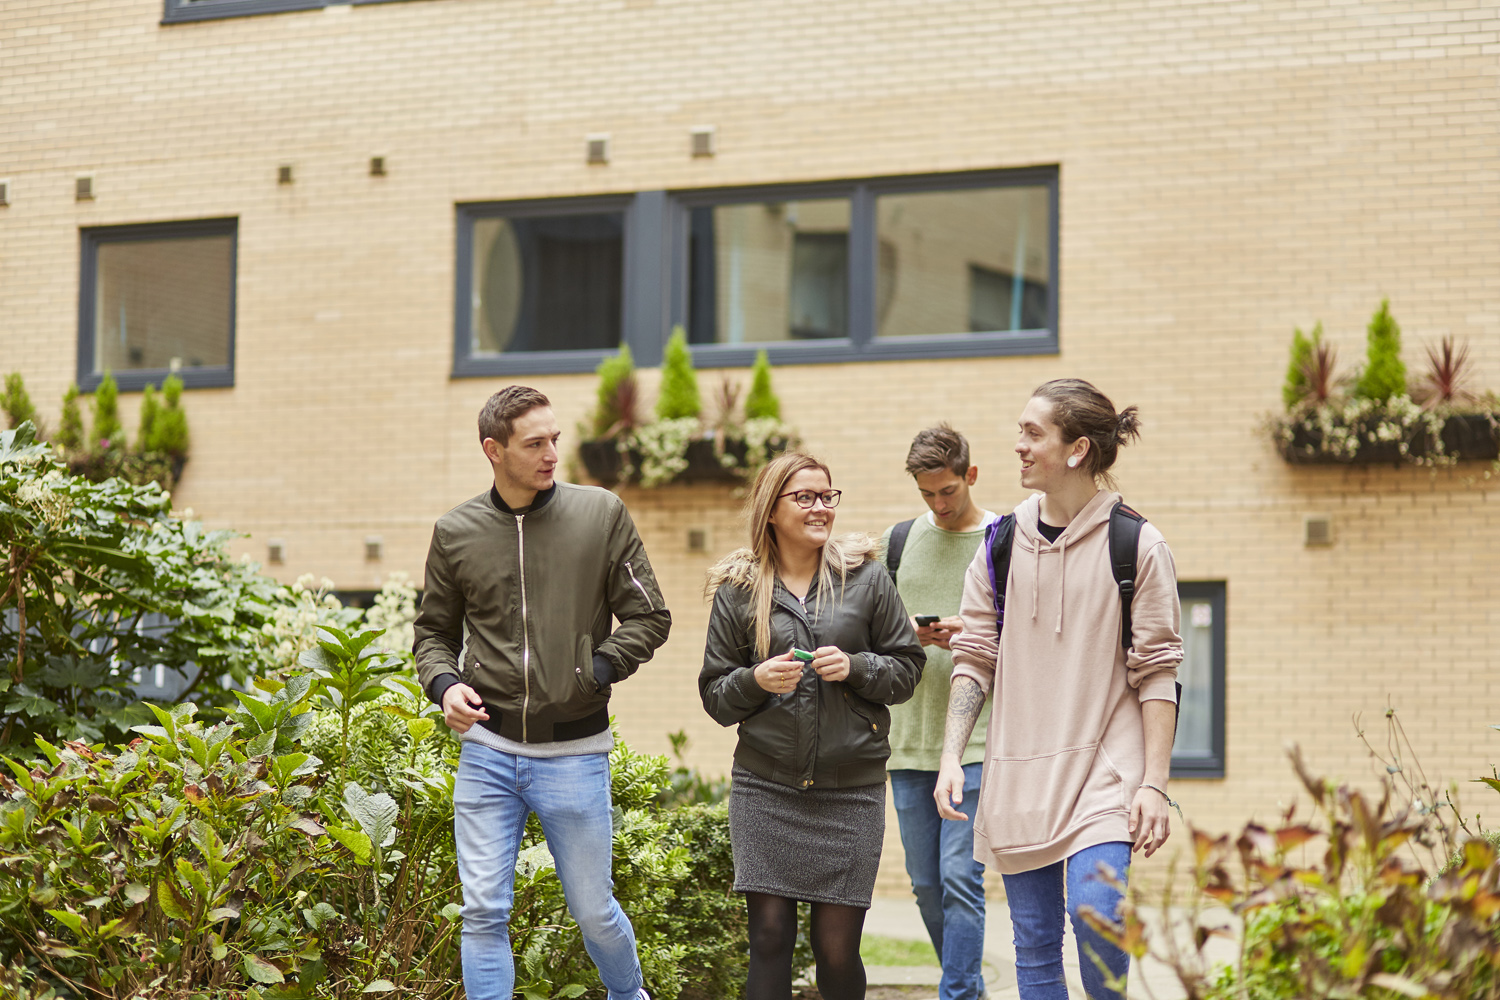 Four students in conversation walking together with Marsden House in the background